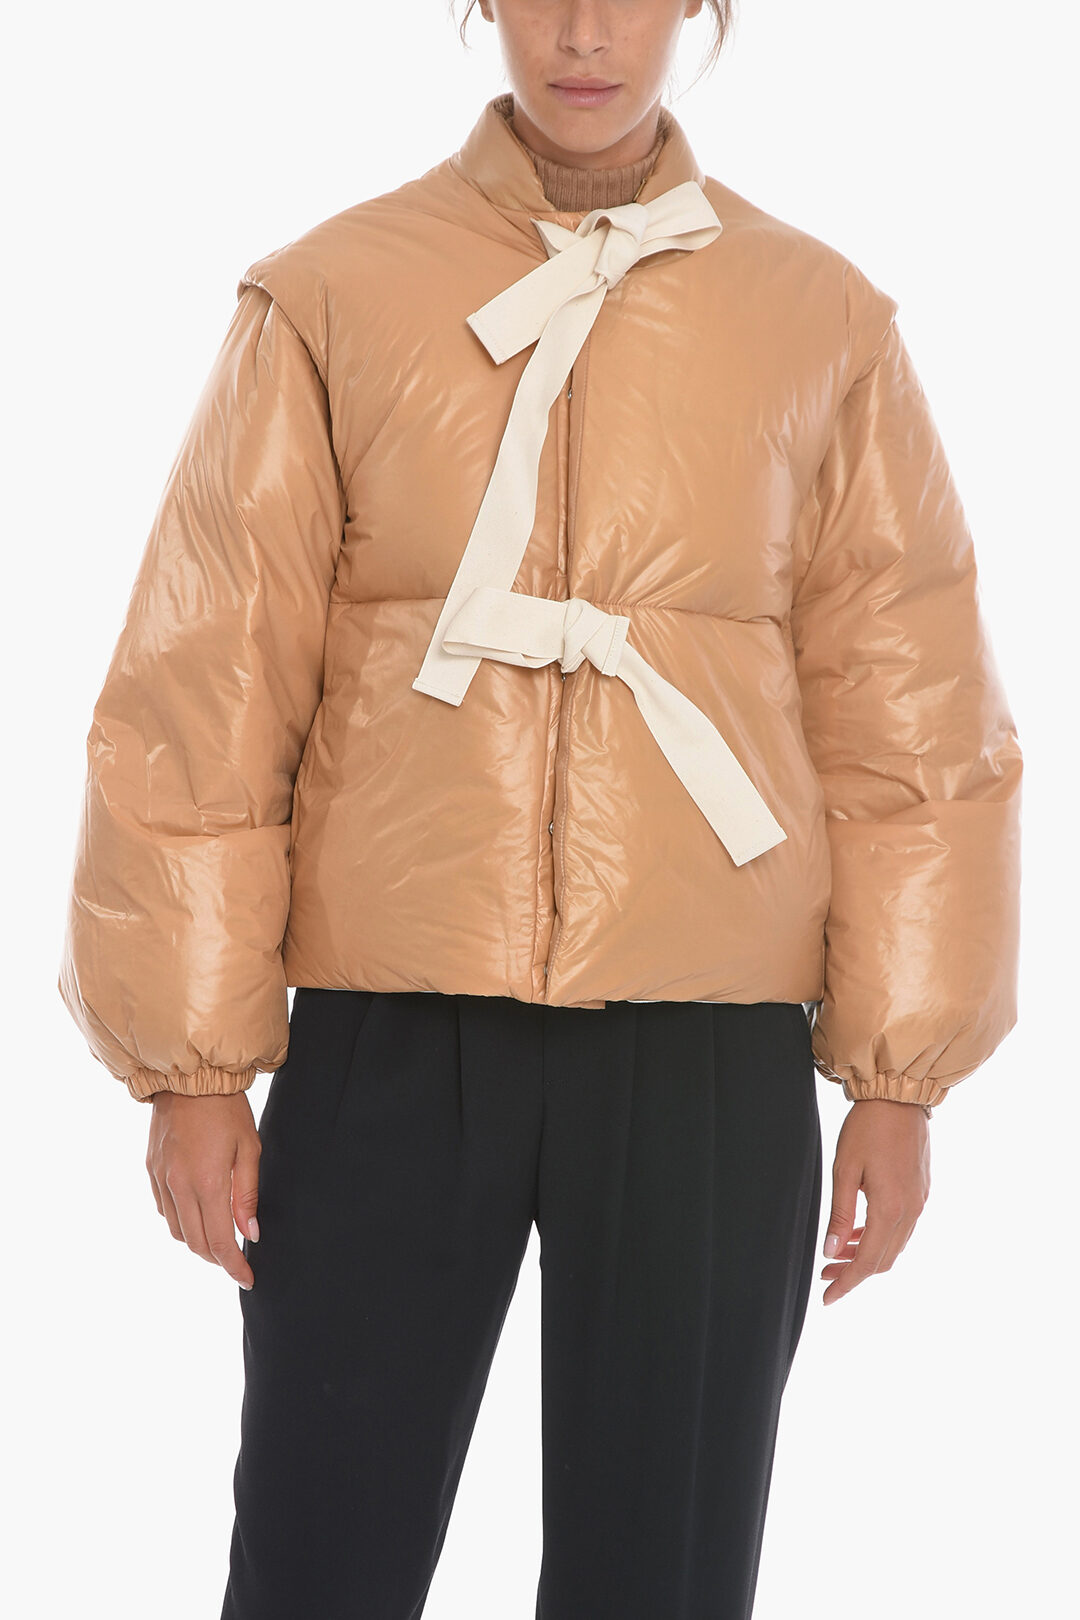 https://data.glamood.com/imgprodotto/cropped-puffer-jacket-with-self-tie-detail_1397133_zoom.jpg